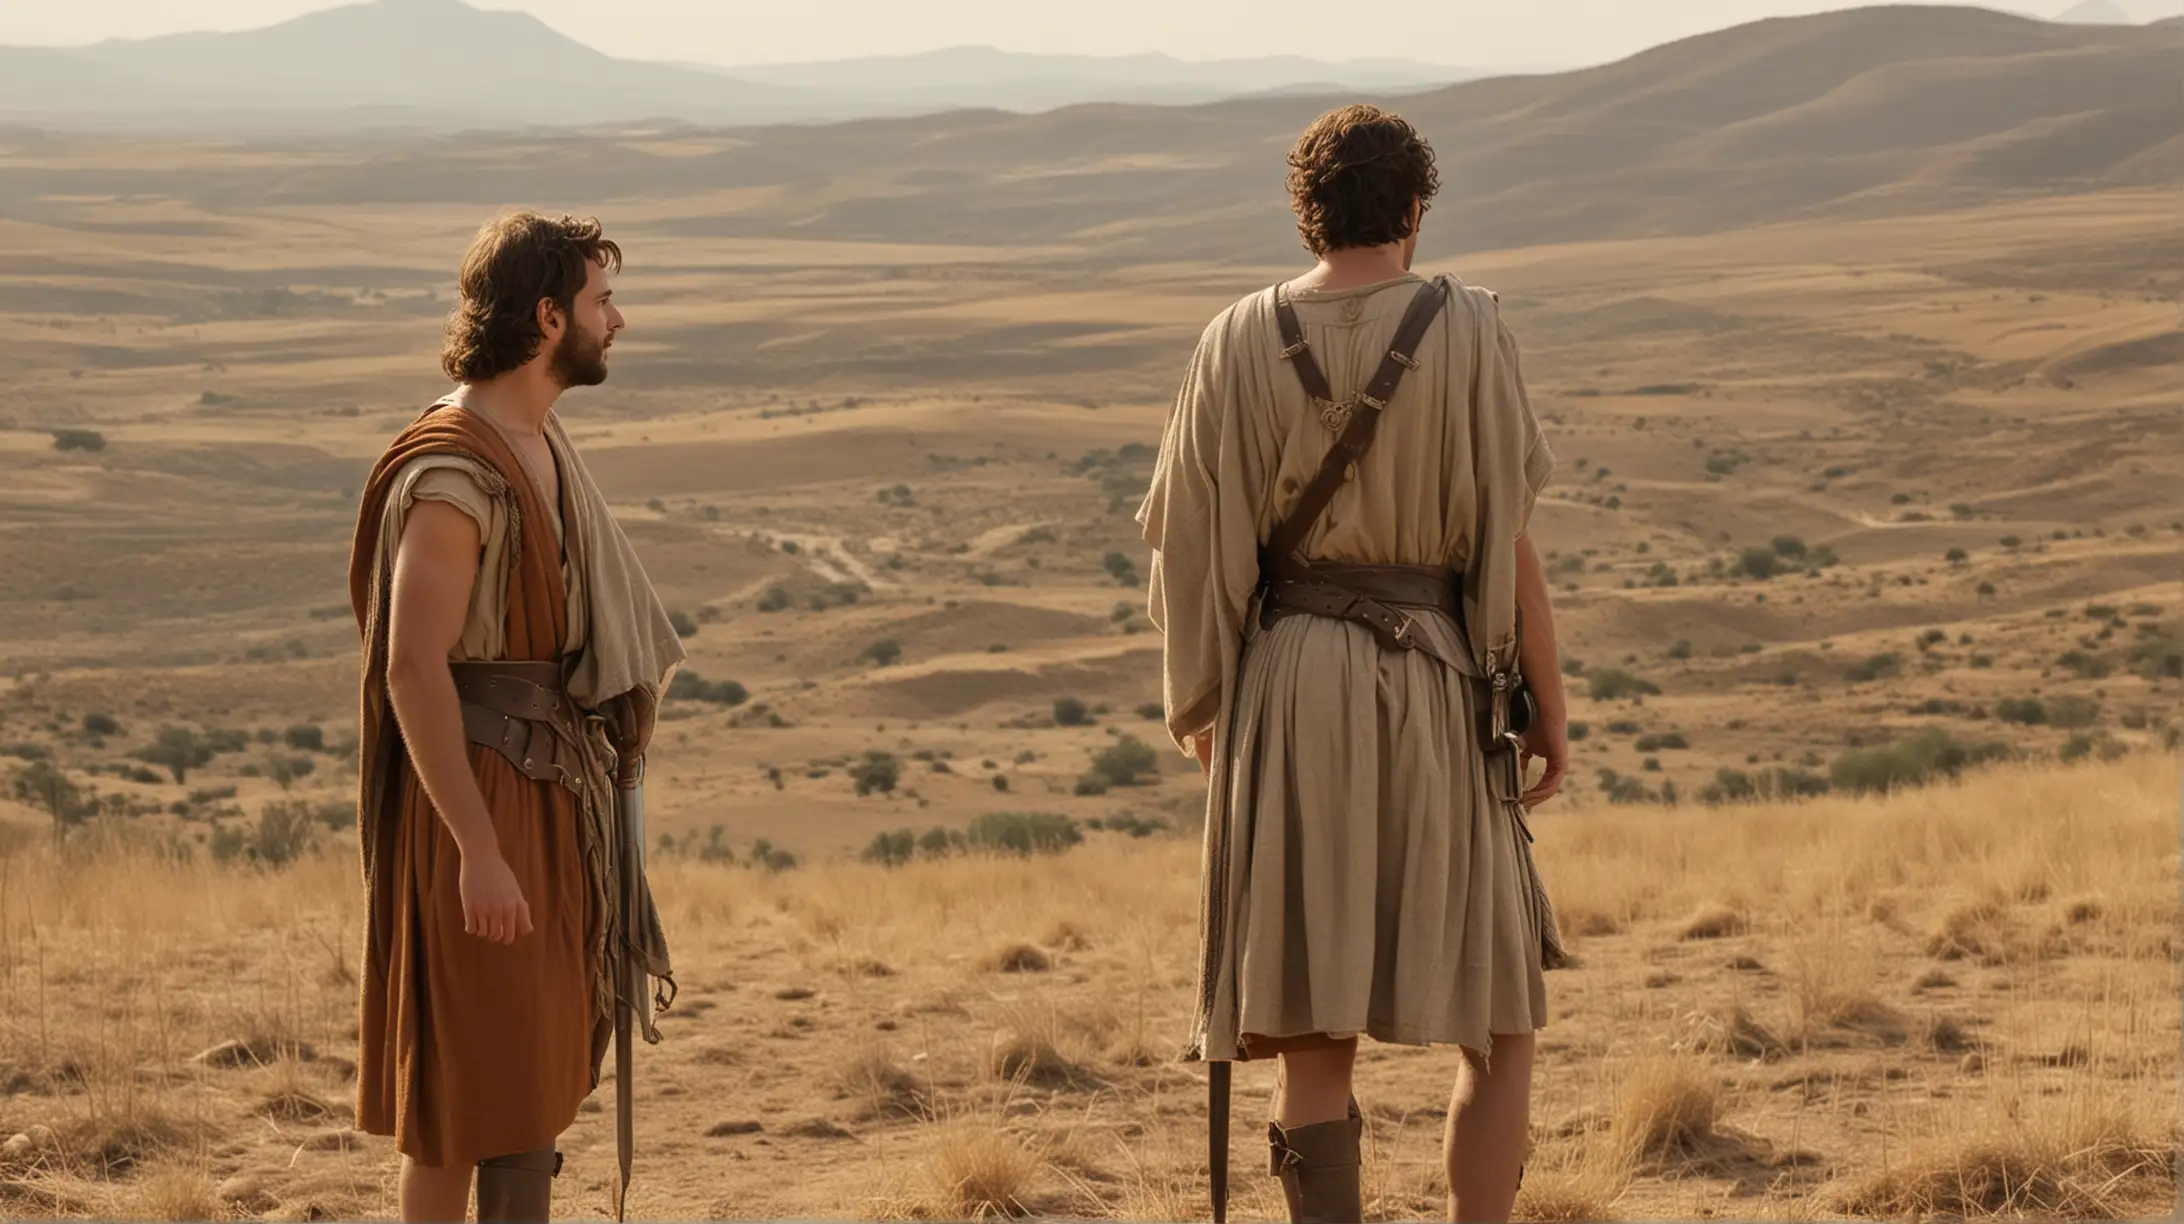 a young king David, and another man, talking in a hilly desert field. Set during the Biblical era of King David